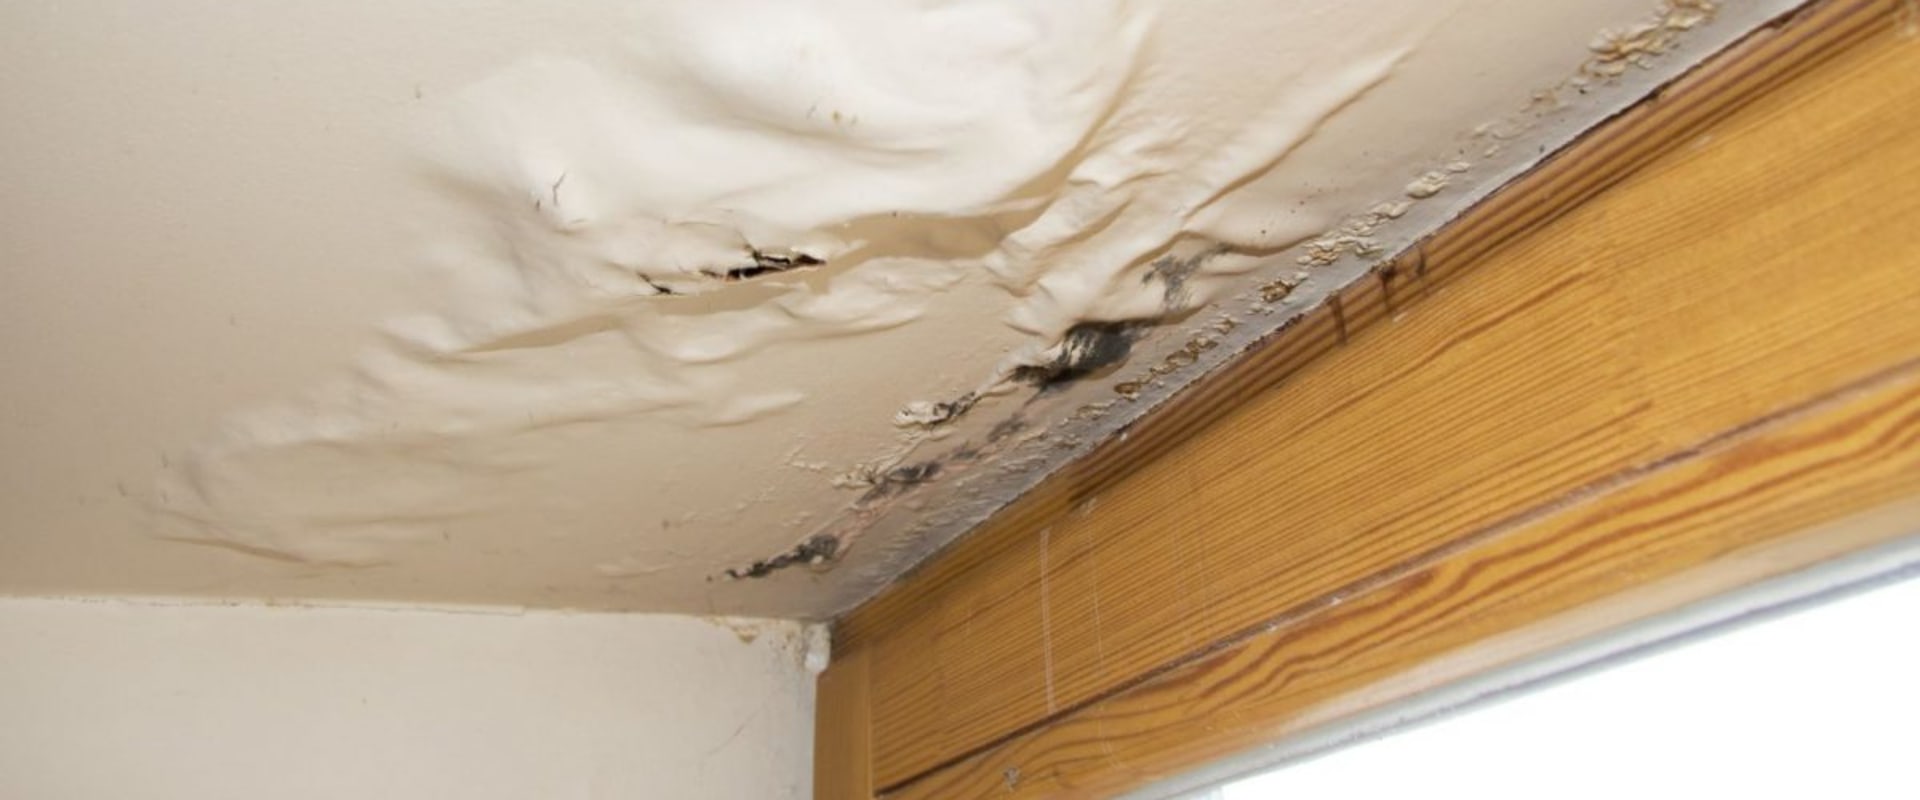 How do you check for water damage in walls?